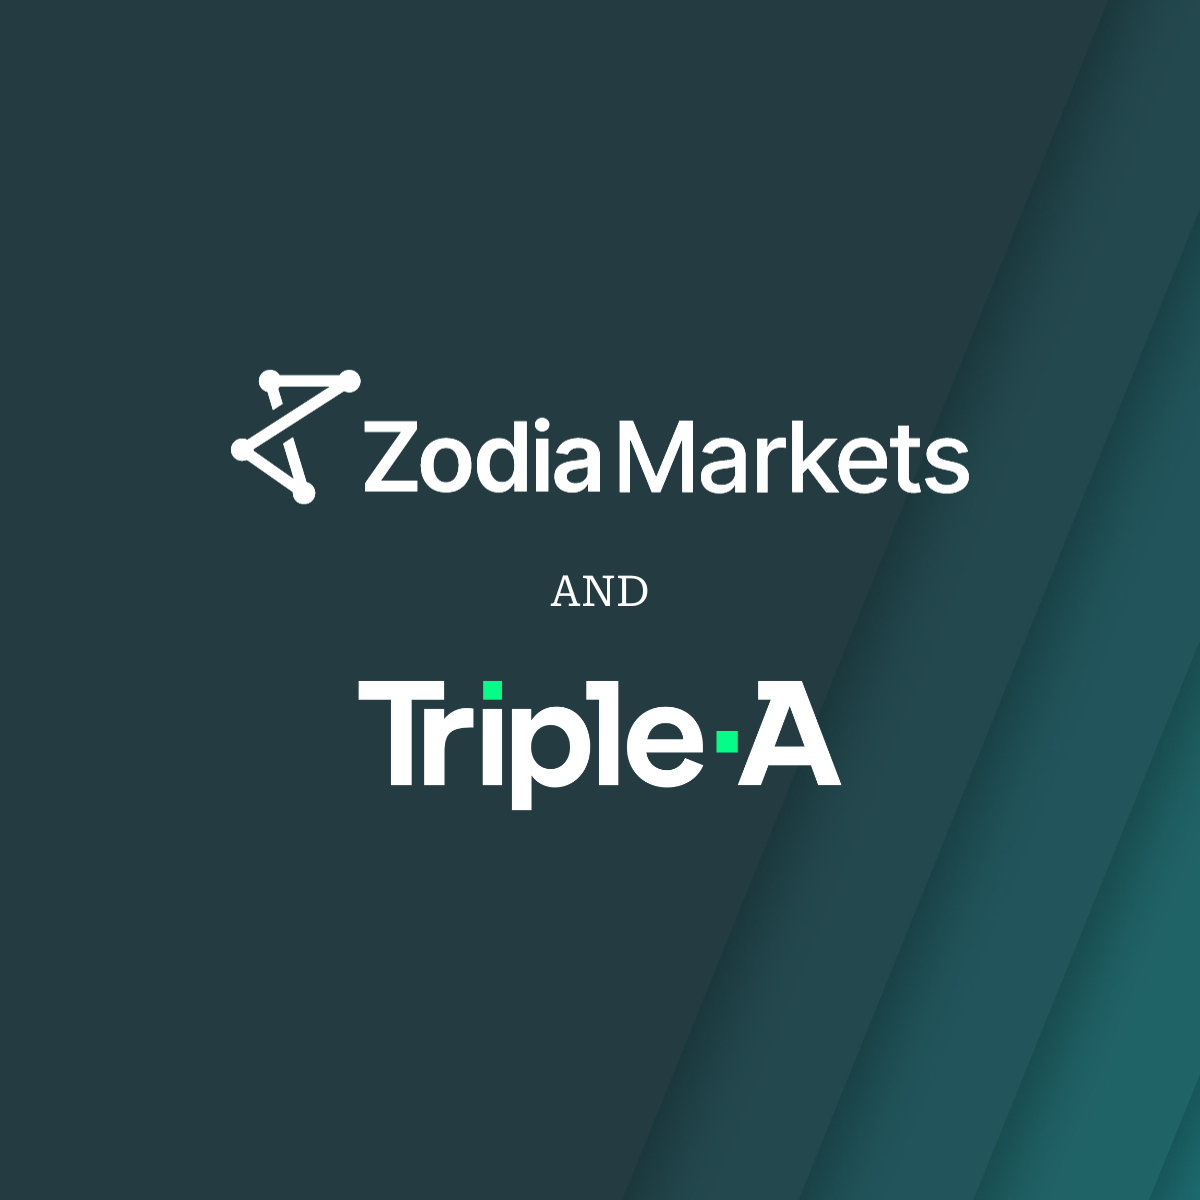 Standard Chartered-backed Zodia Markets announces partnership with Triple-A